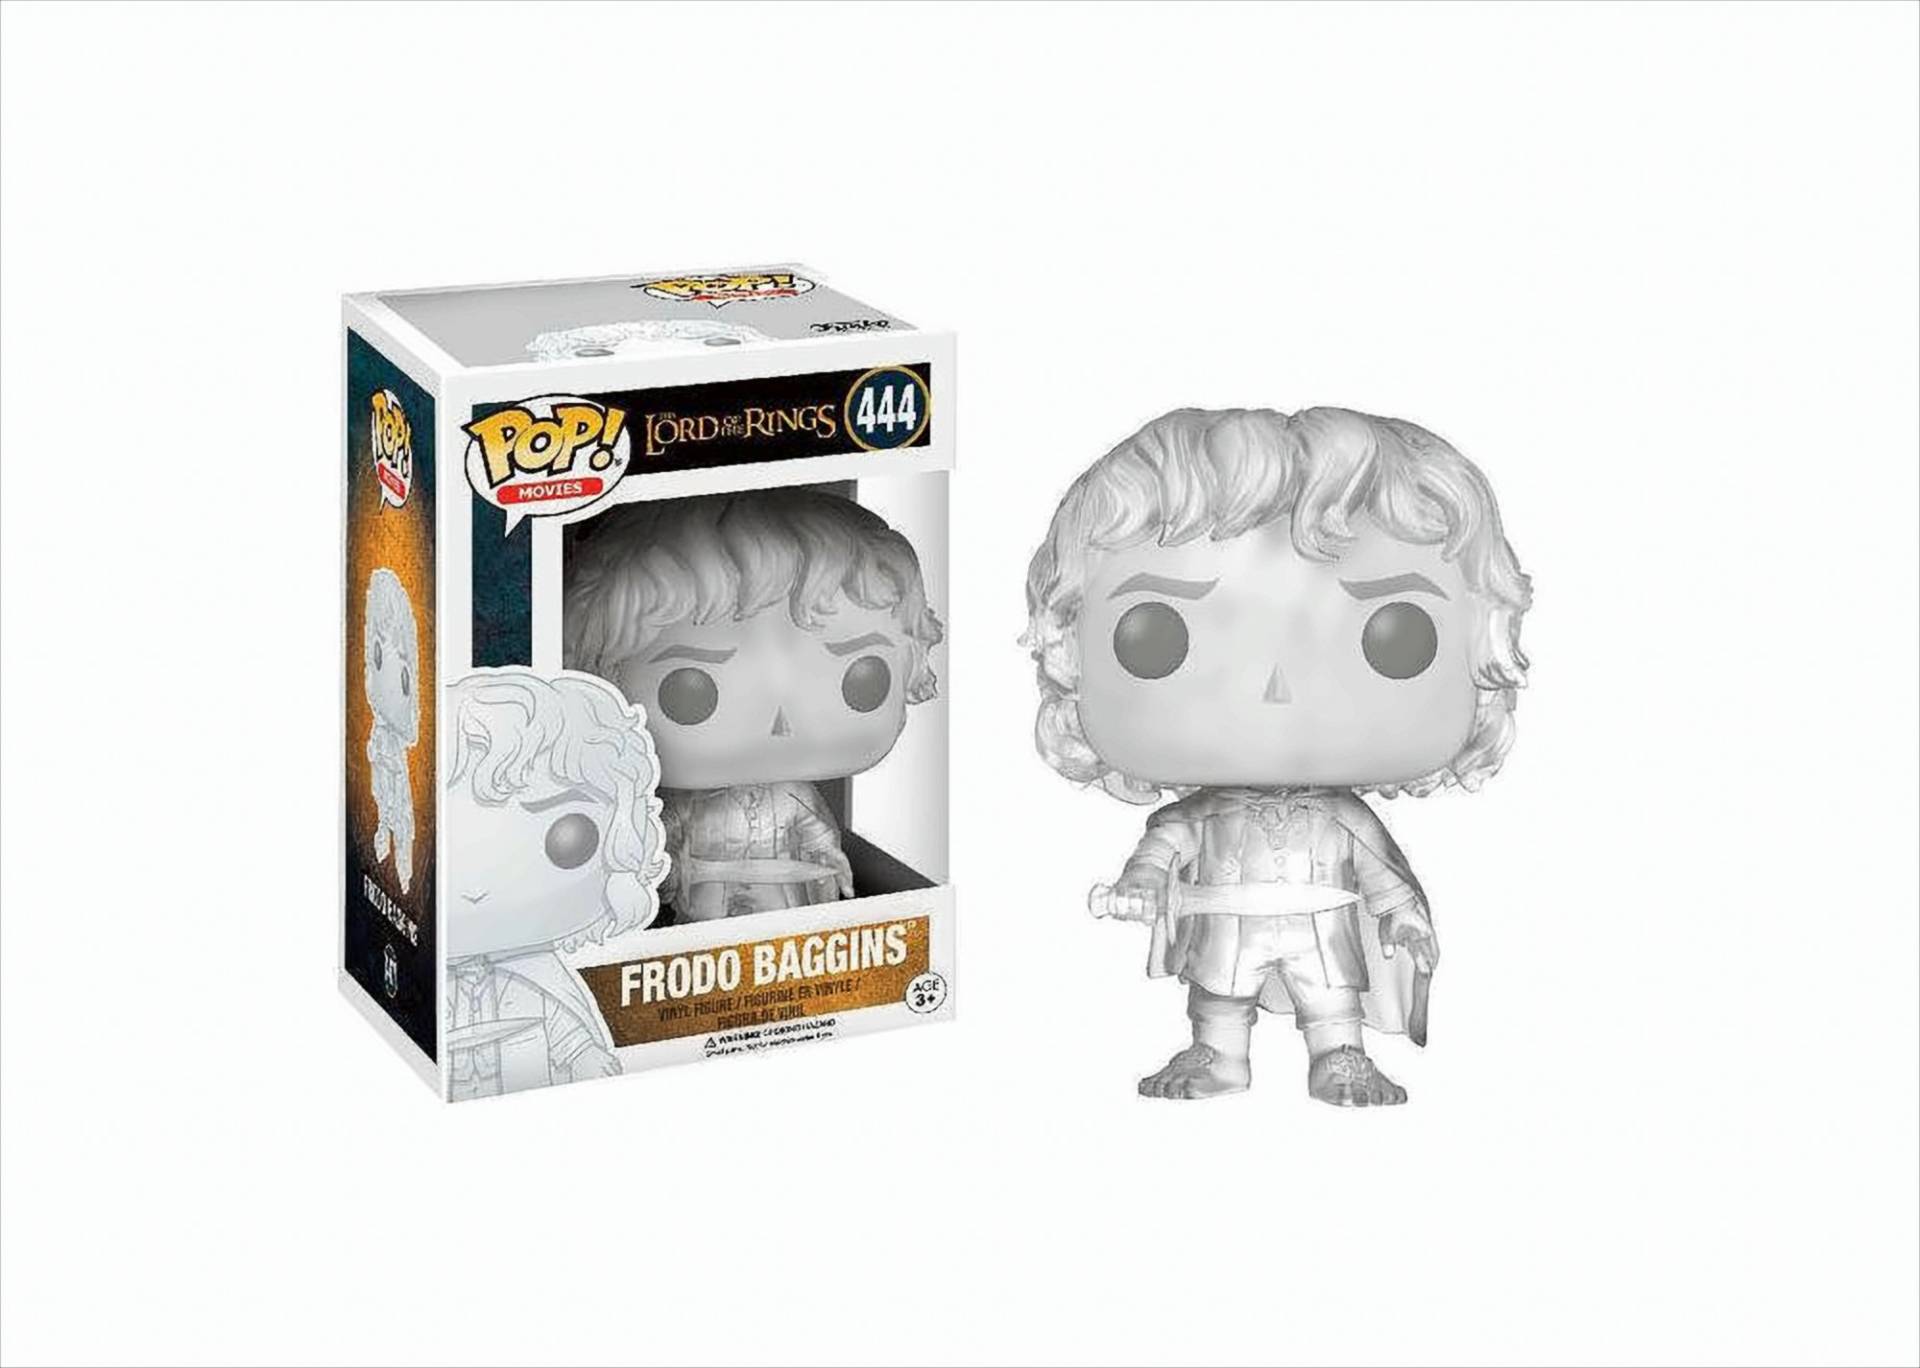 Funko Pop Movies - The Lord of the Rings - Frodo Baggins Exclusive von Funko